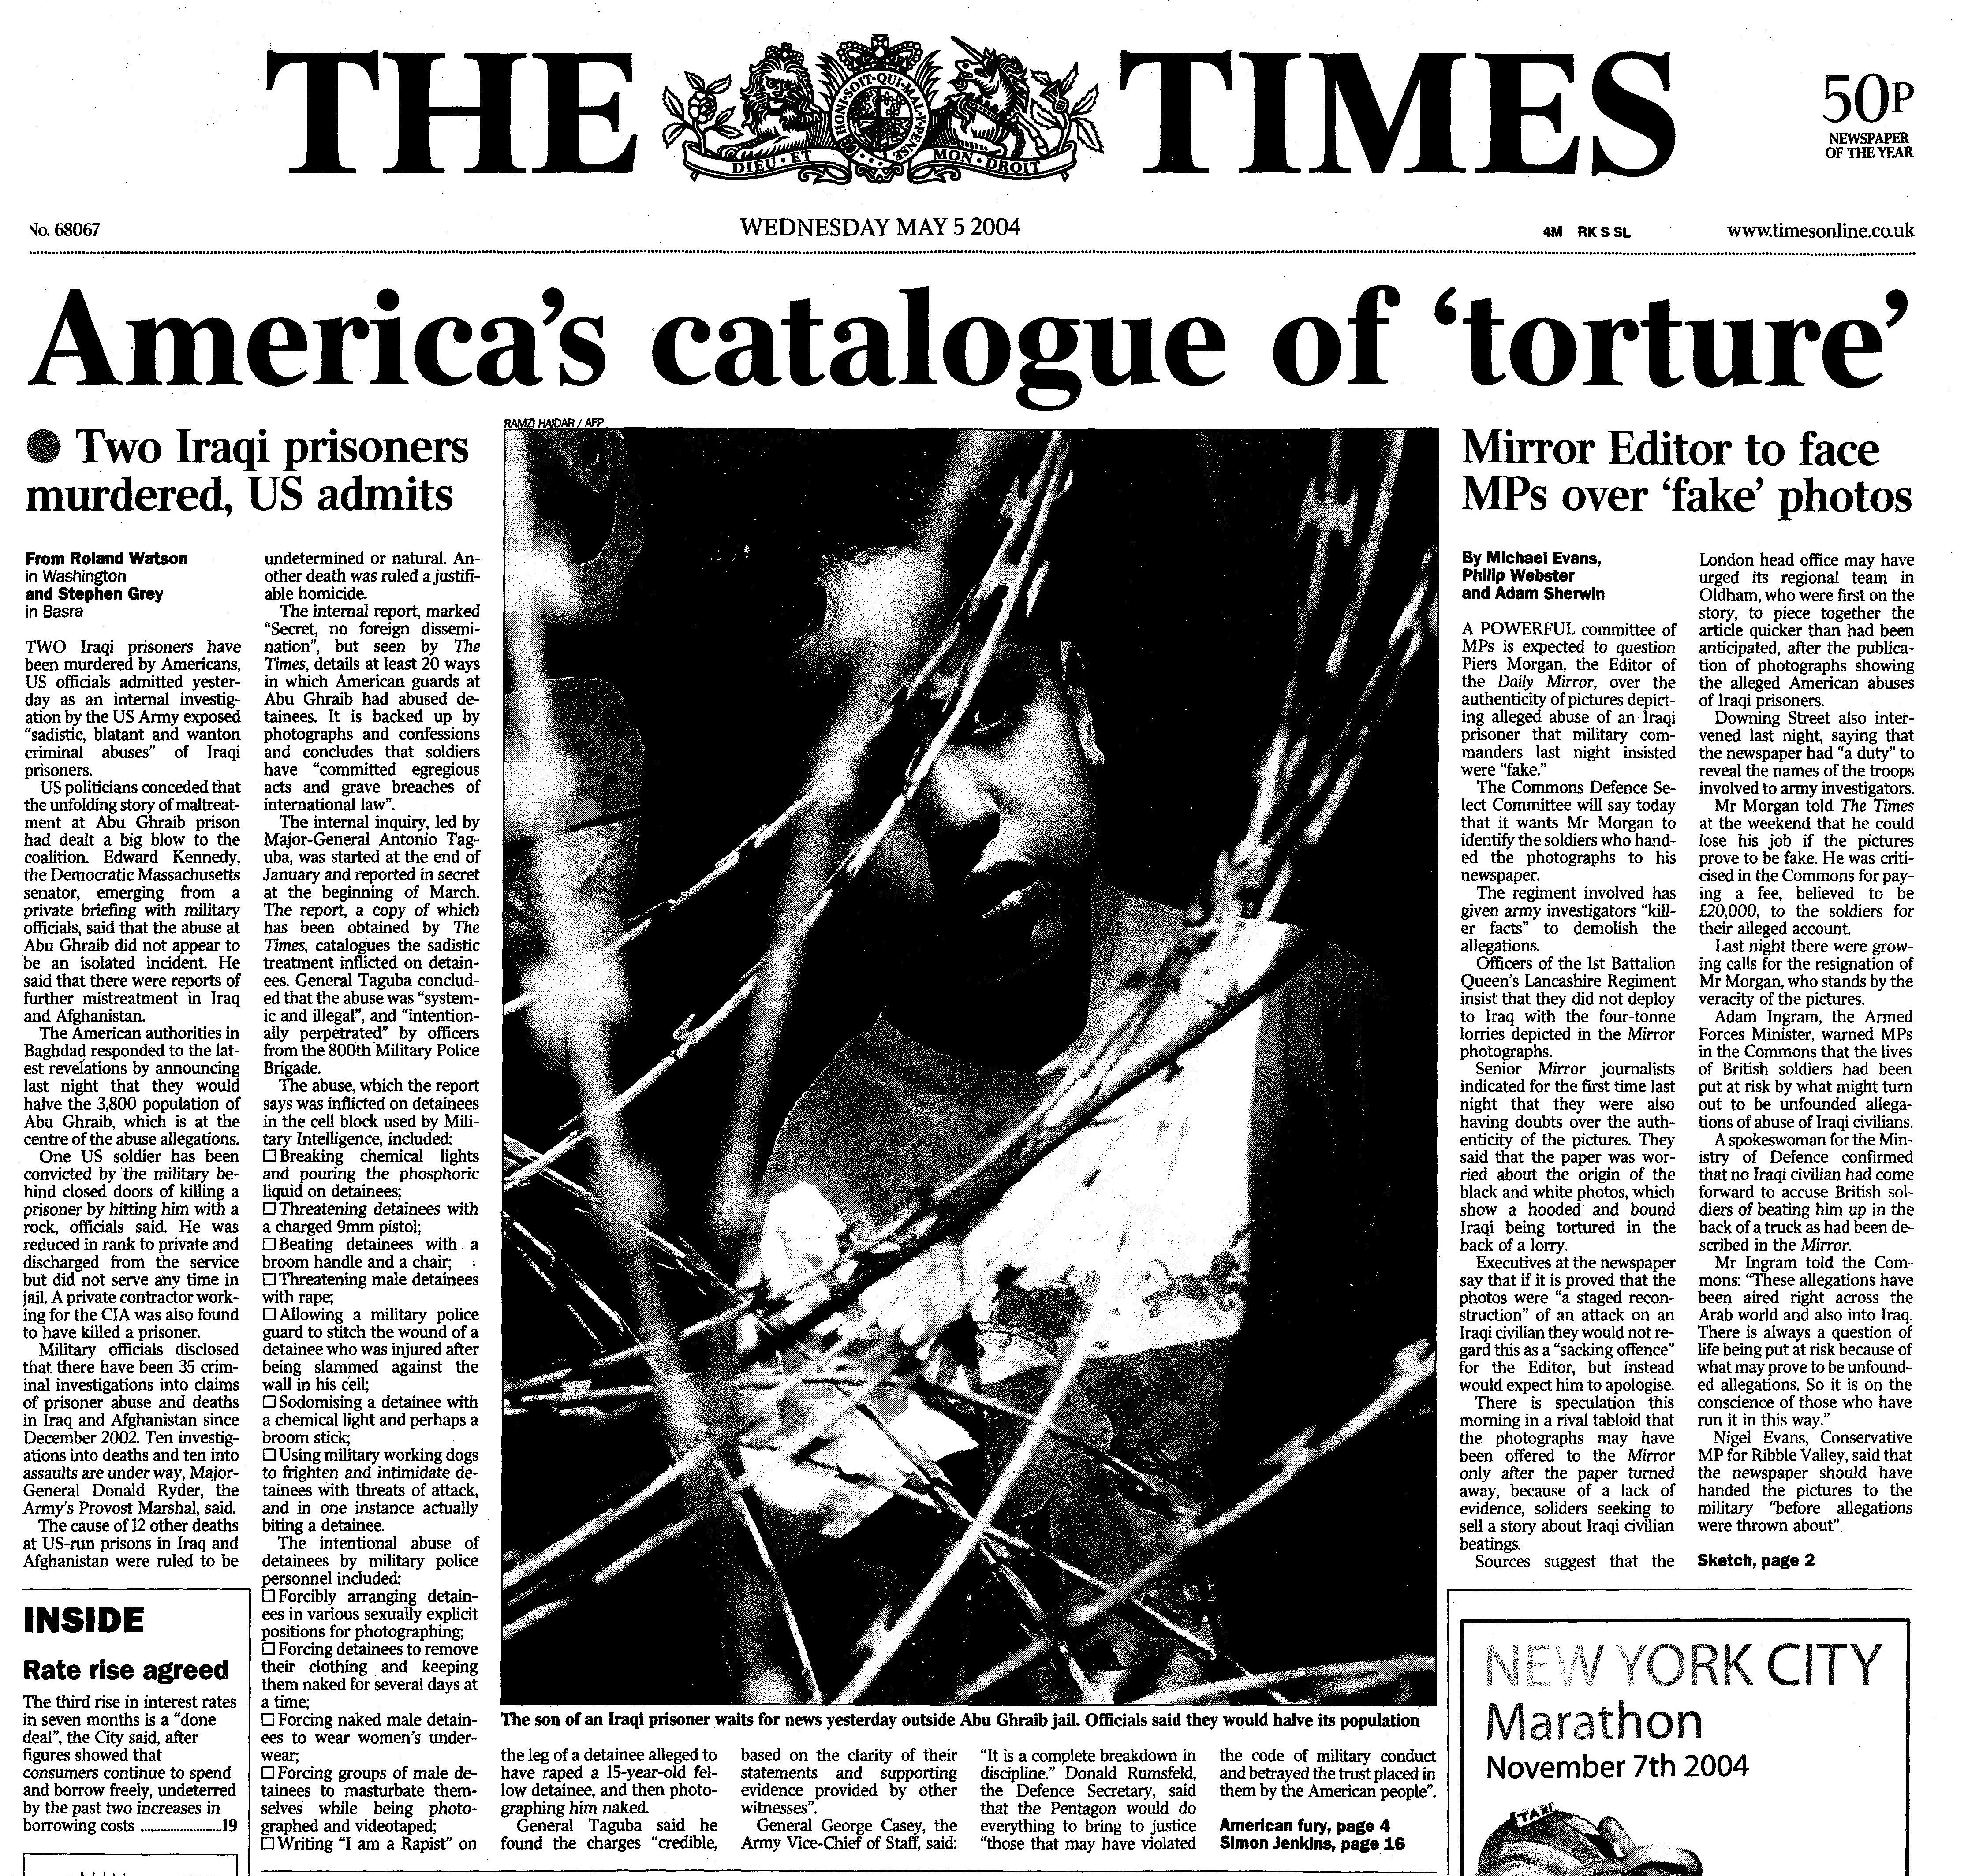 How The Times reported the abuse — if viewing on a mobile device, select the image to zoom in